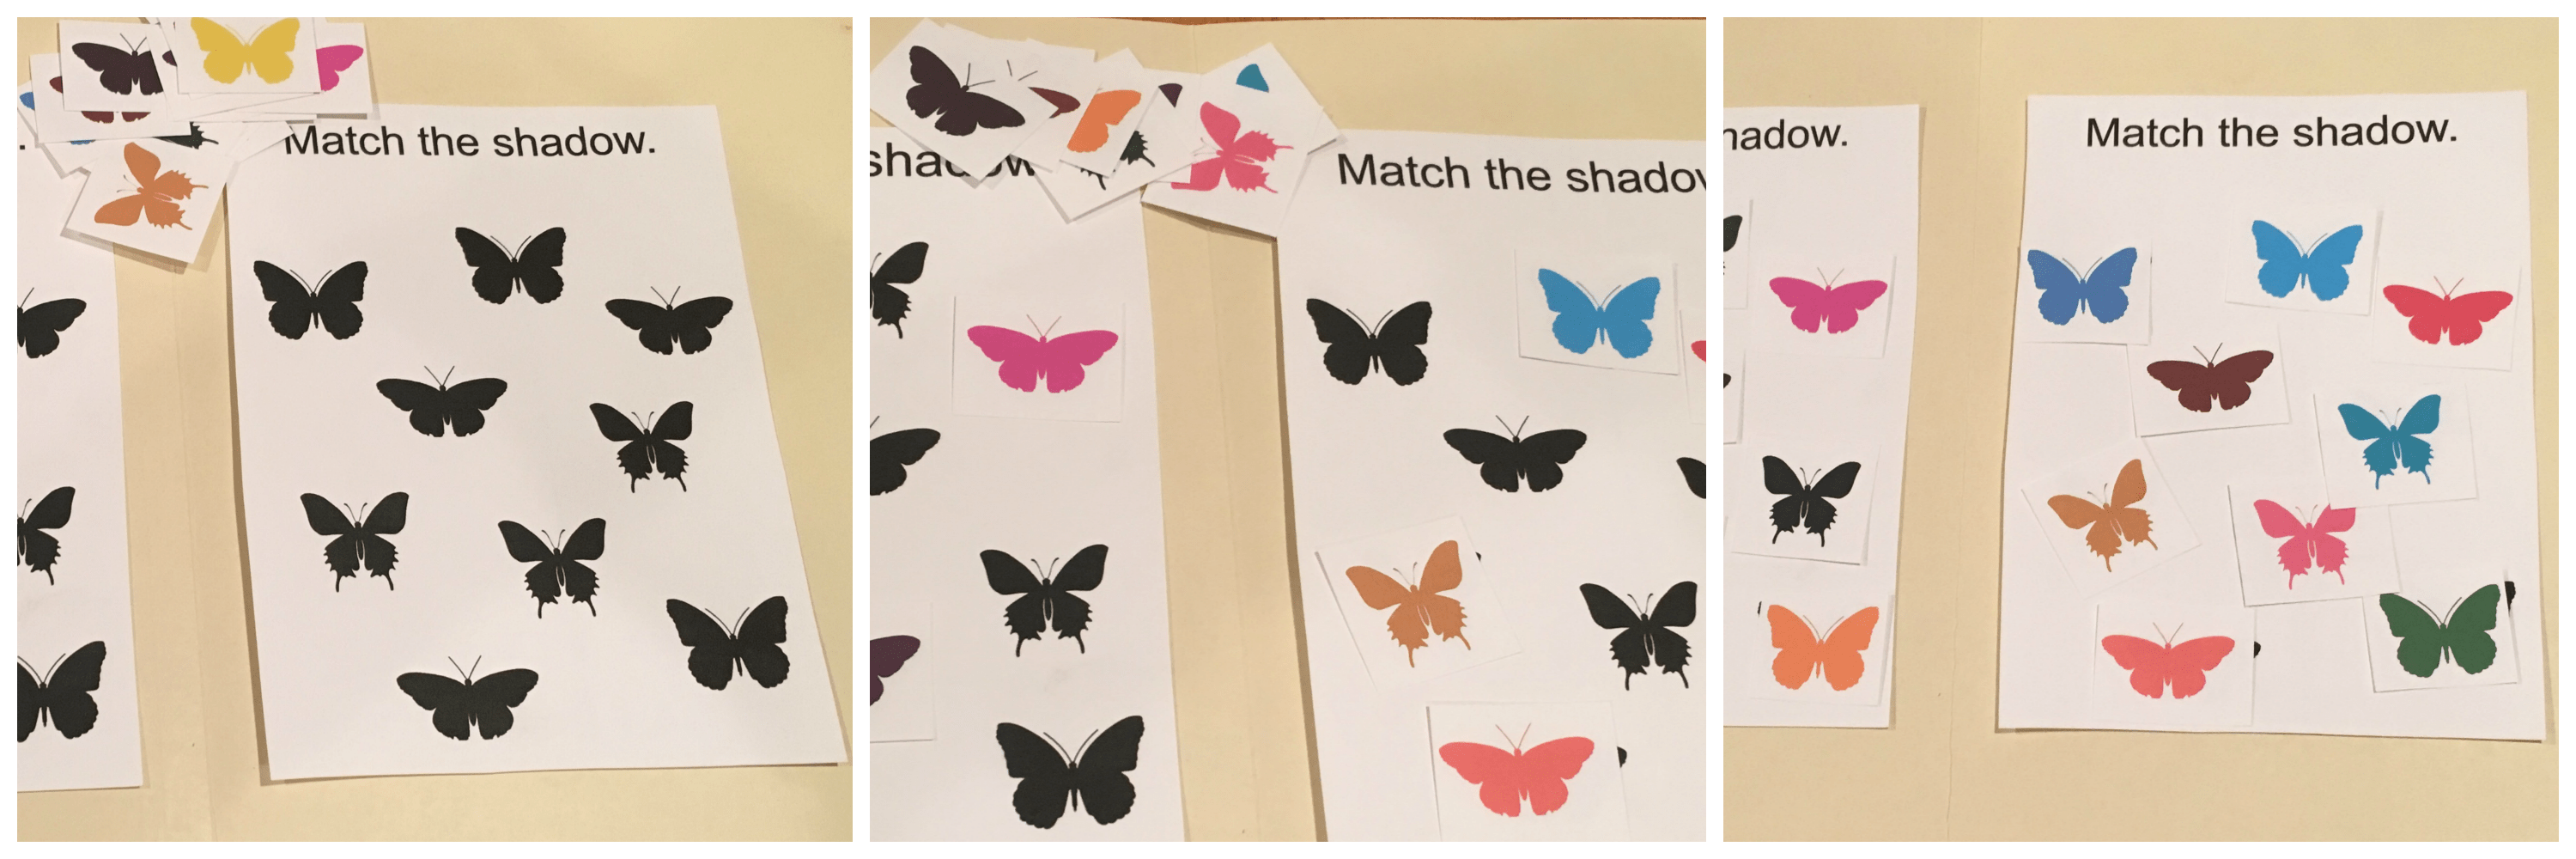 These printable butterfly file folder games are fantastic for keeping the kids busy and engaged while learning! Download the printable and simple cut and paste to a file folder!